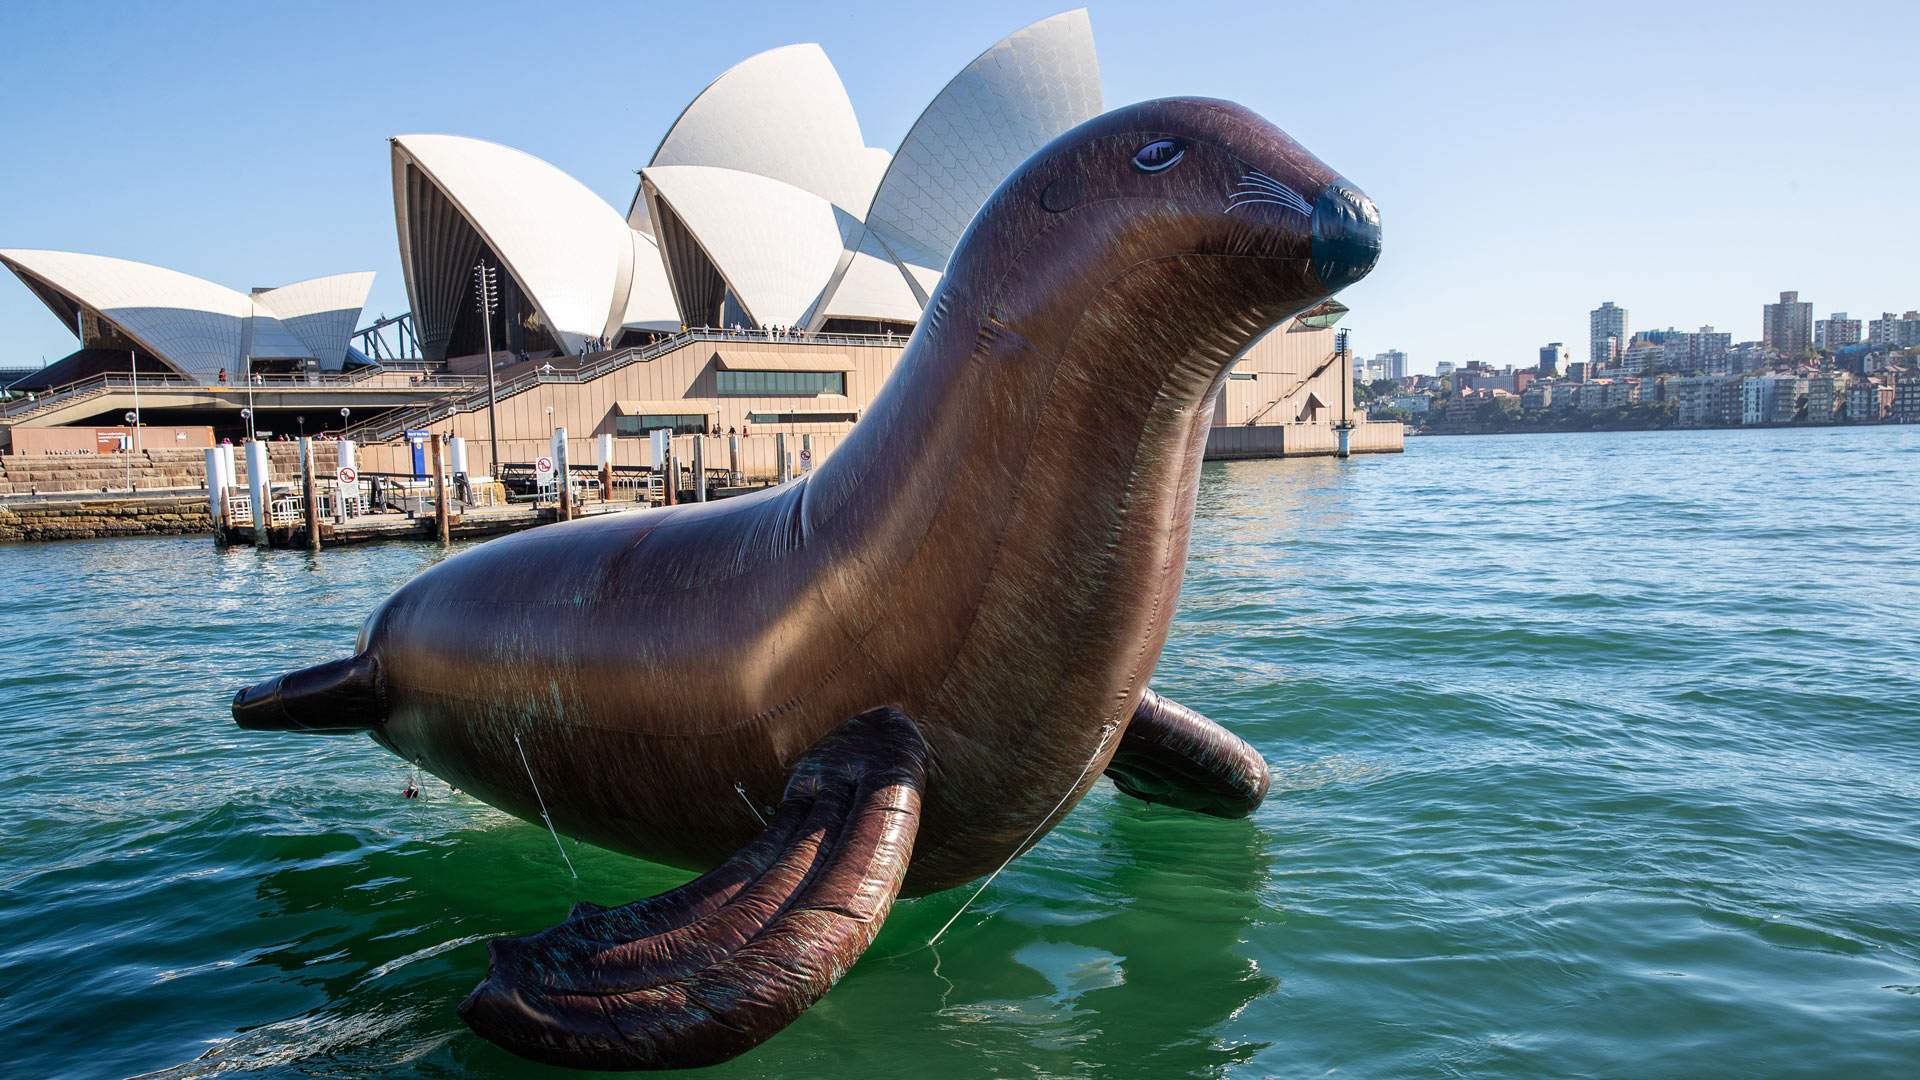 A Huge Inflatable Sydney Opera House Seal Is Currently Floating on the Harbour